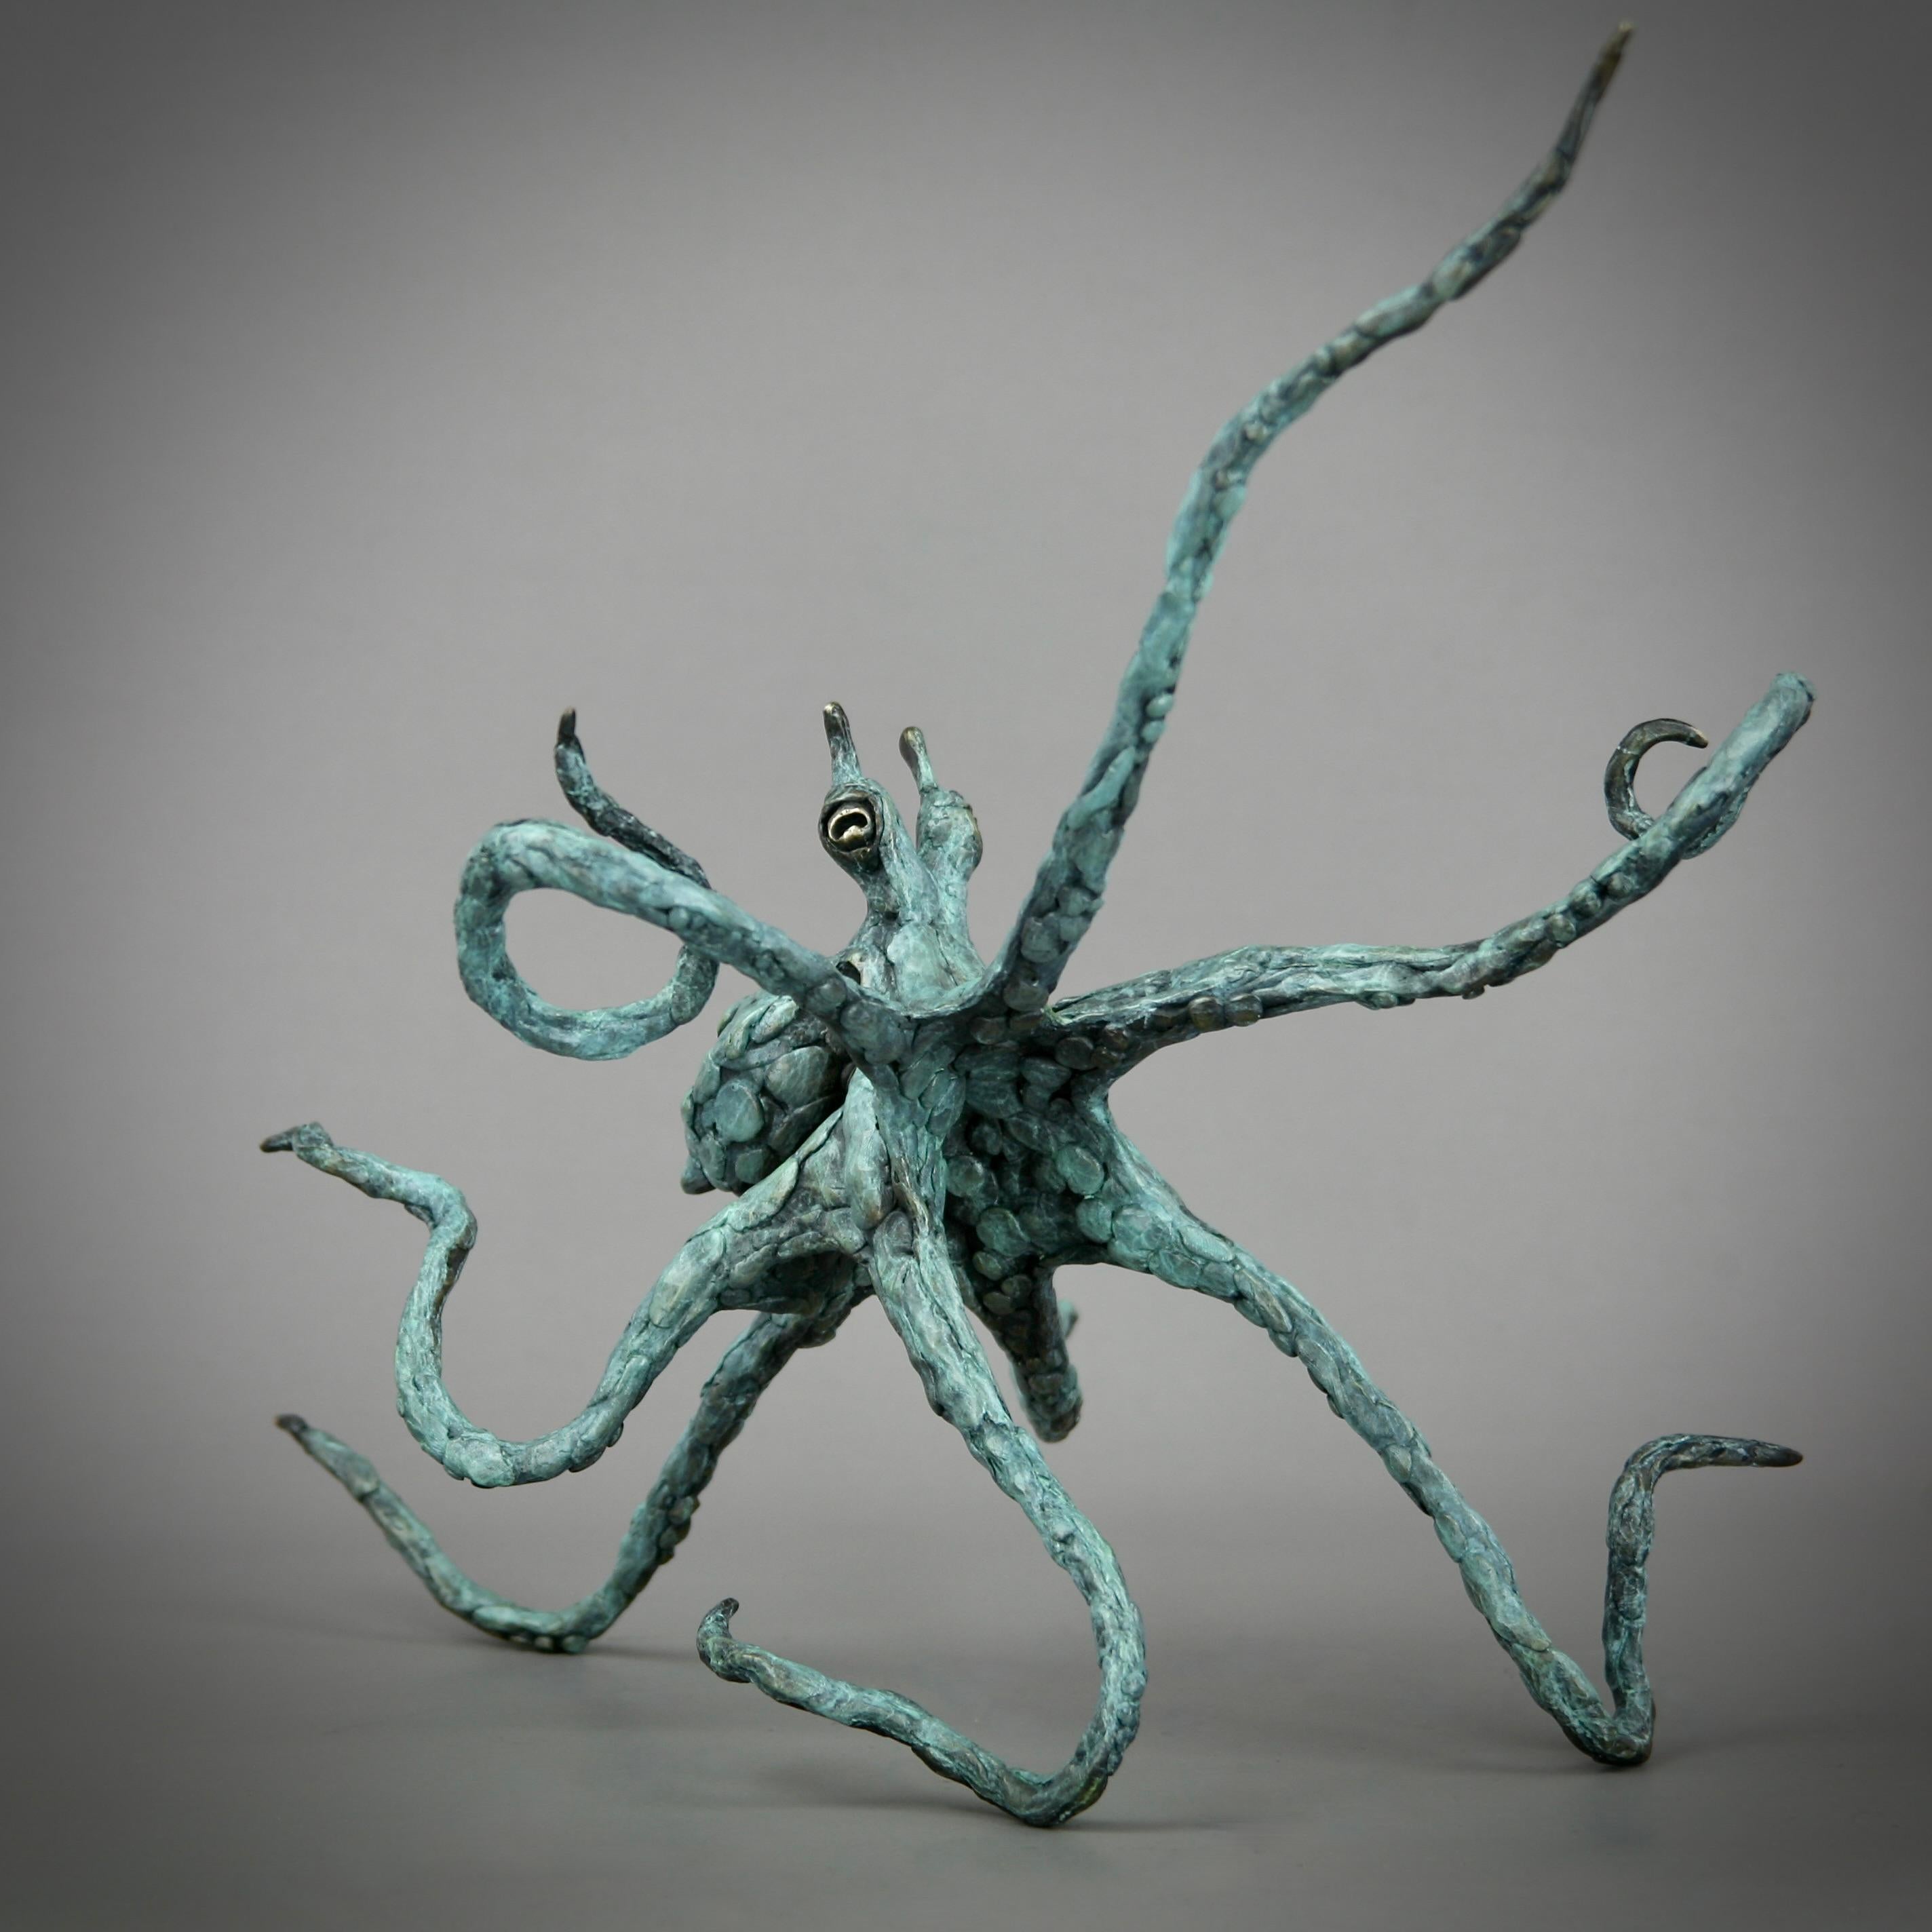 Octopus Green Patina- bronze sculpture- limited edition- Modern- Contemporary  - Abstract Impressionist Sculpture by Andrzej Szymczyk